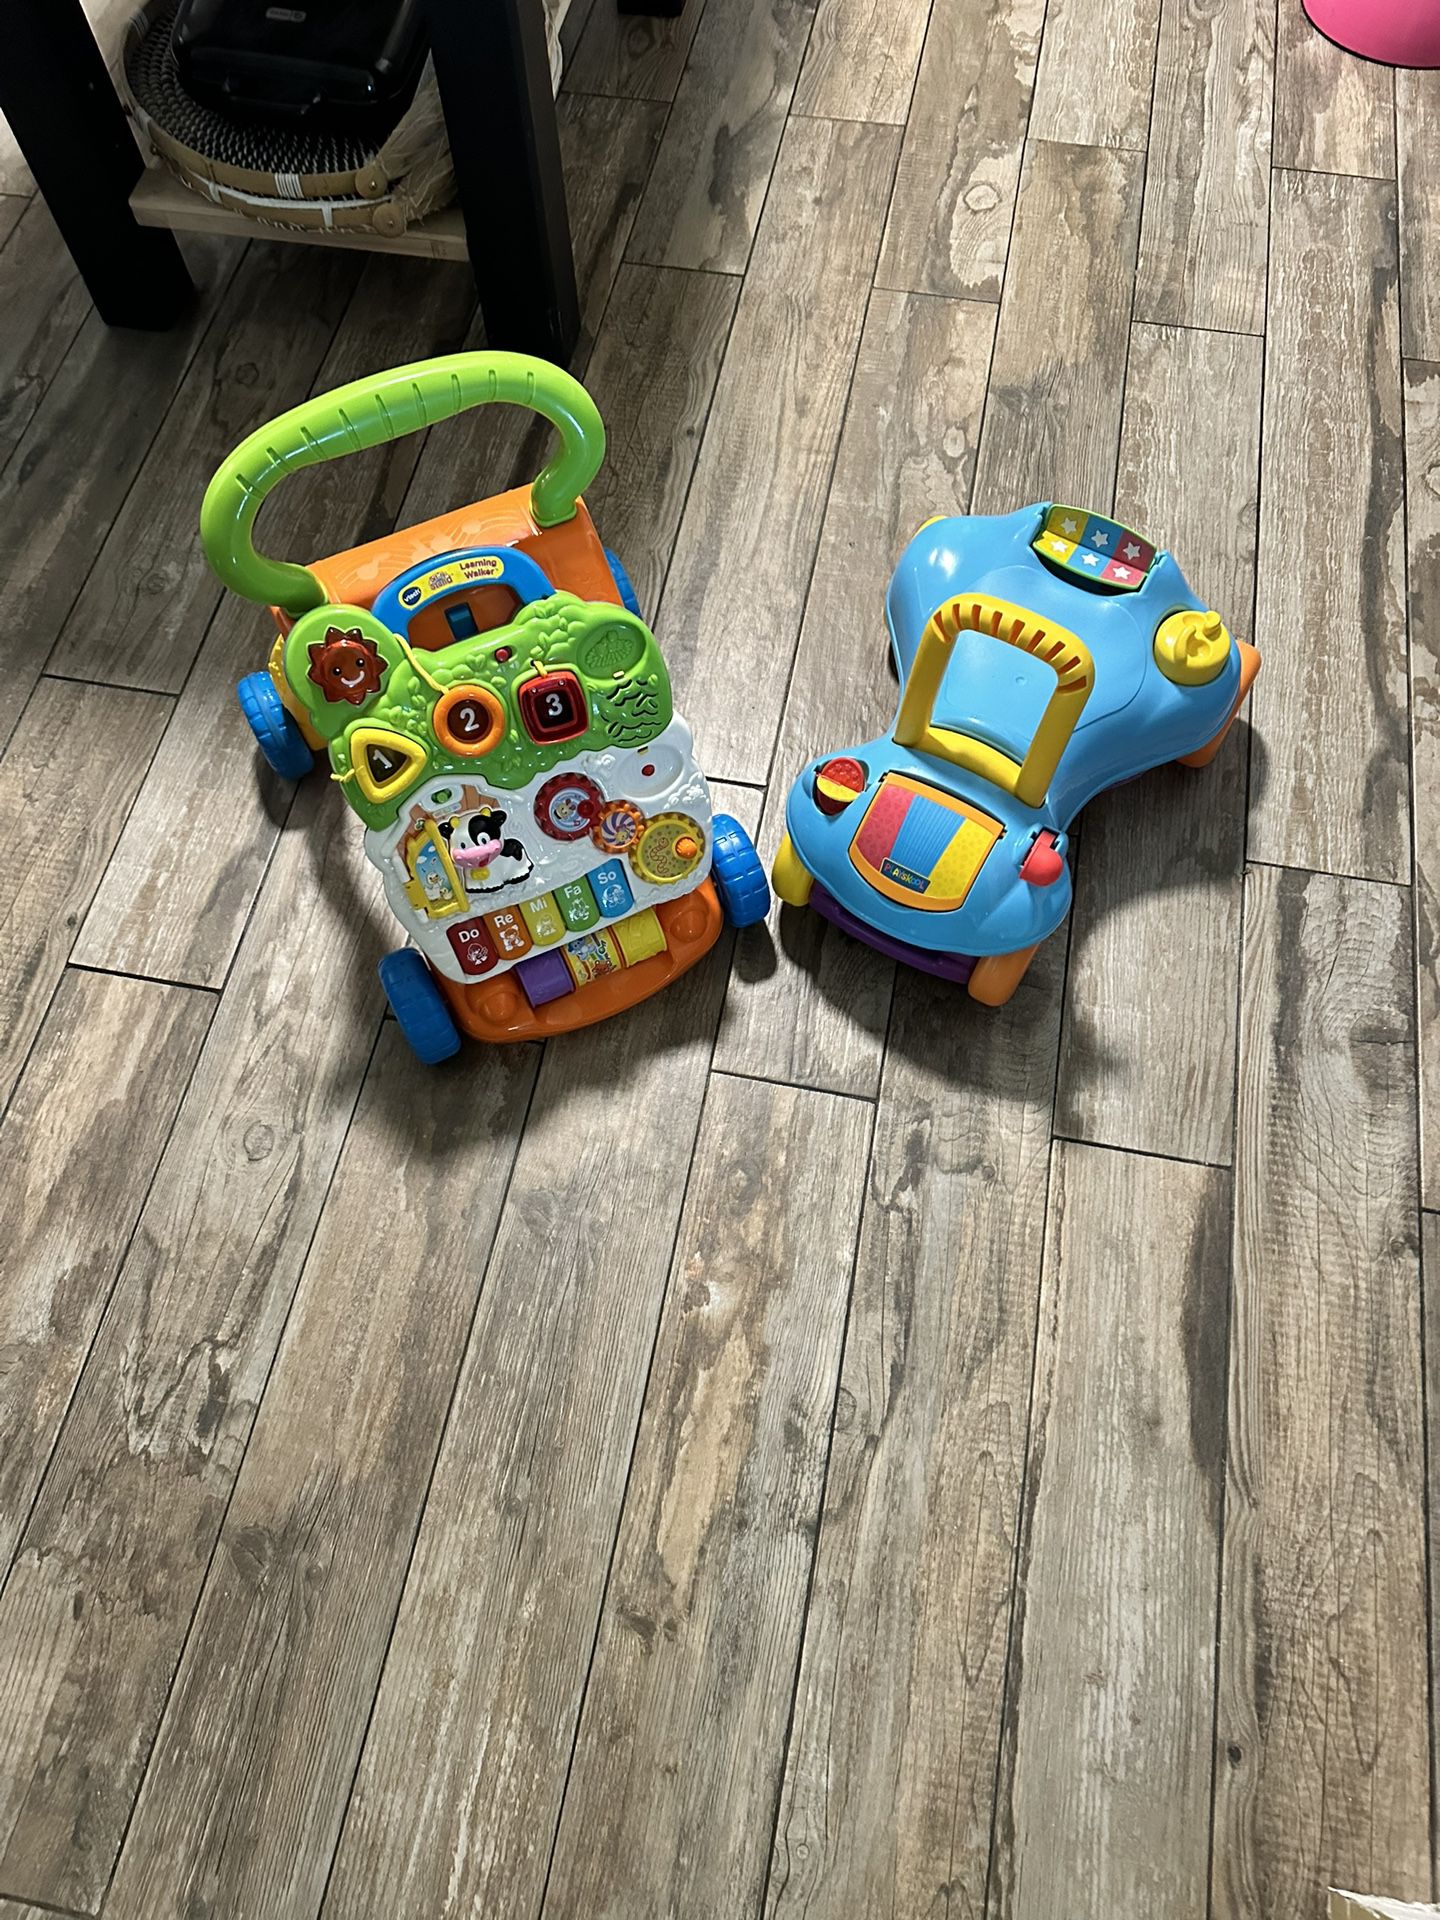 Baby/toddler Toys Like New $20 For Both 